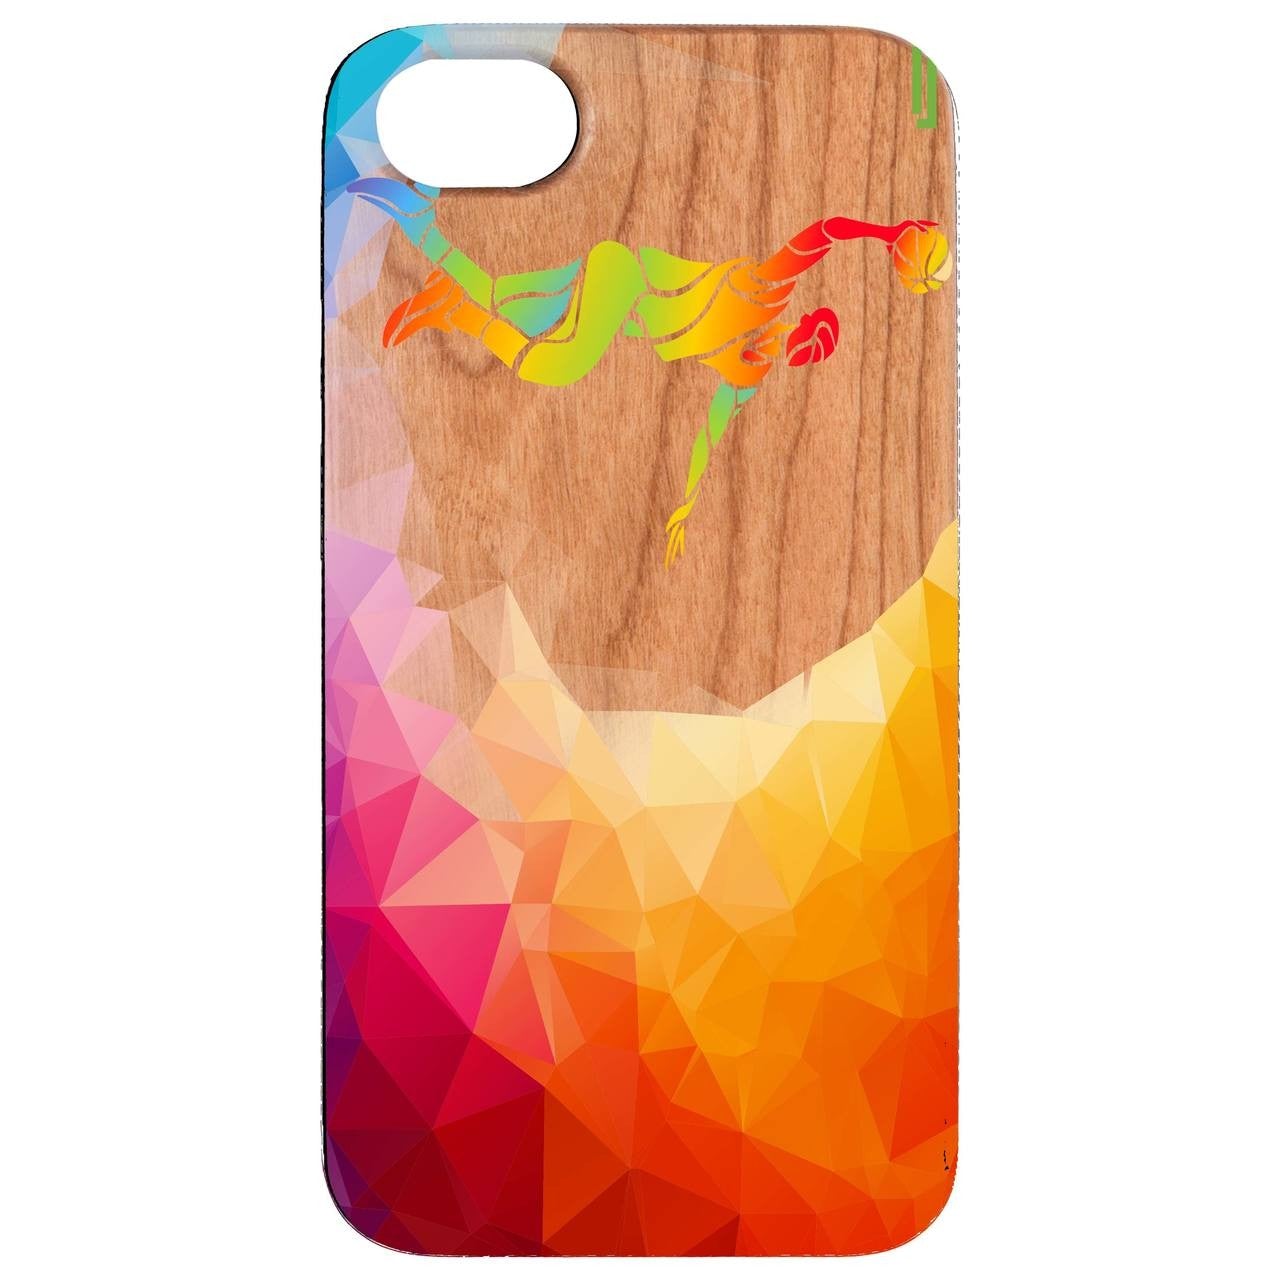  Basketball Player - UV Color Printed - Wooden Phone Case - IPhone 13 Models